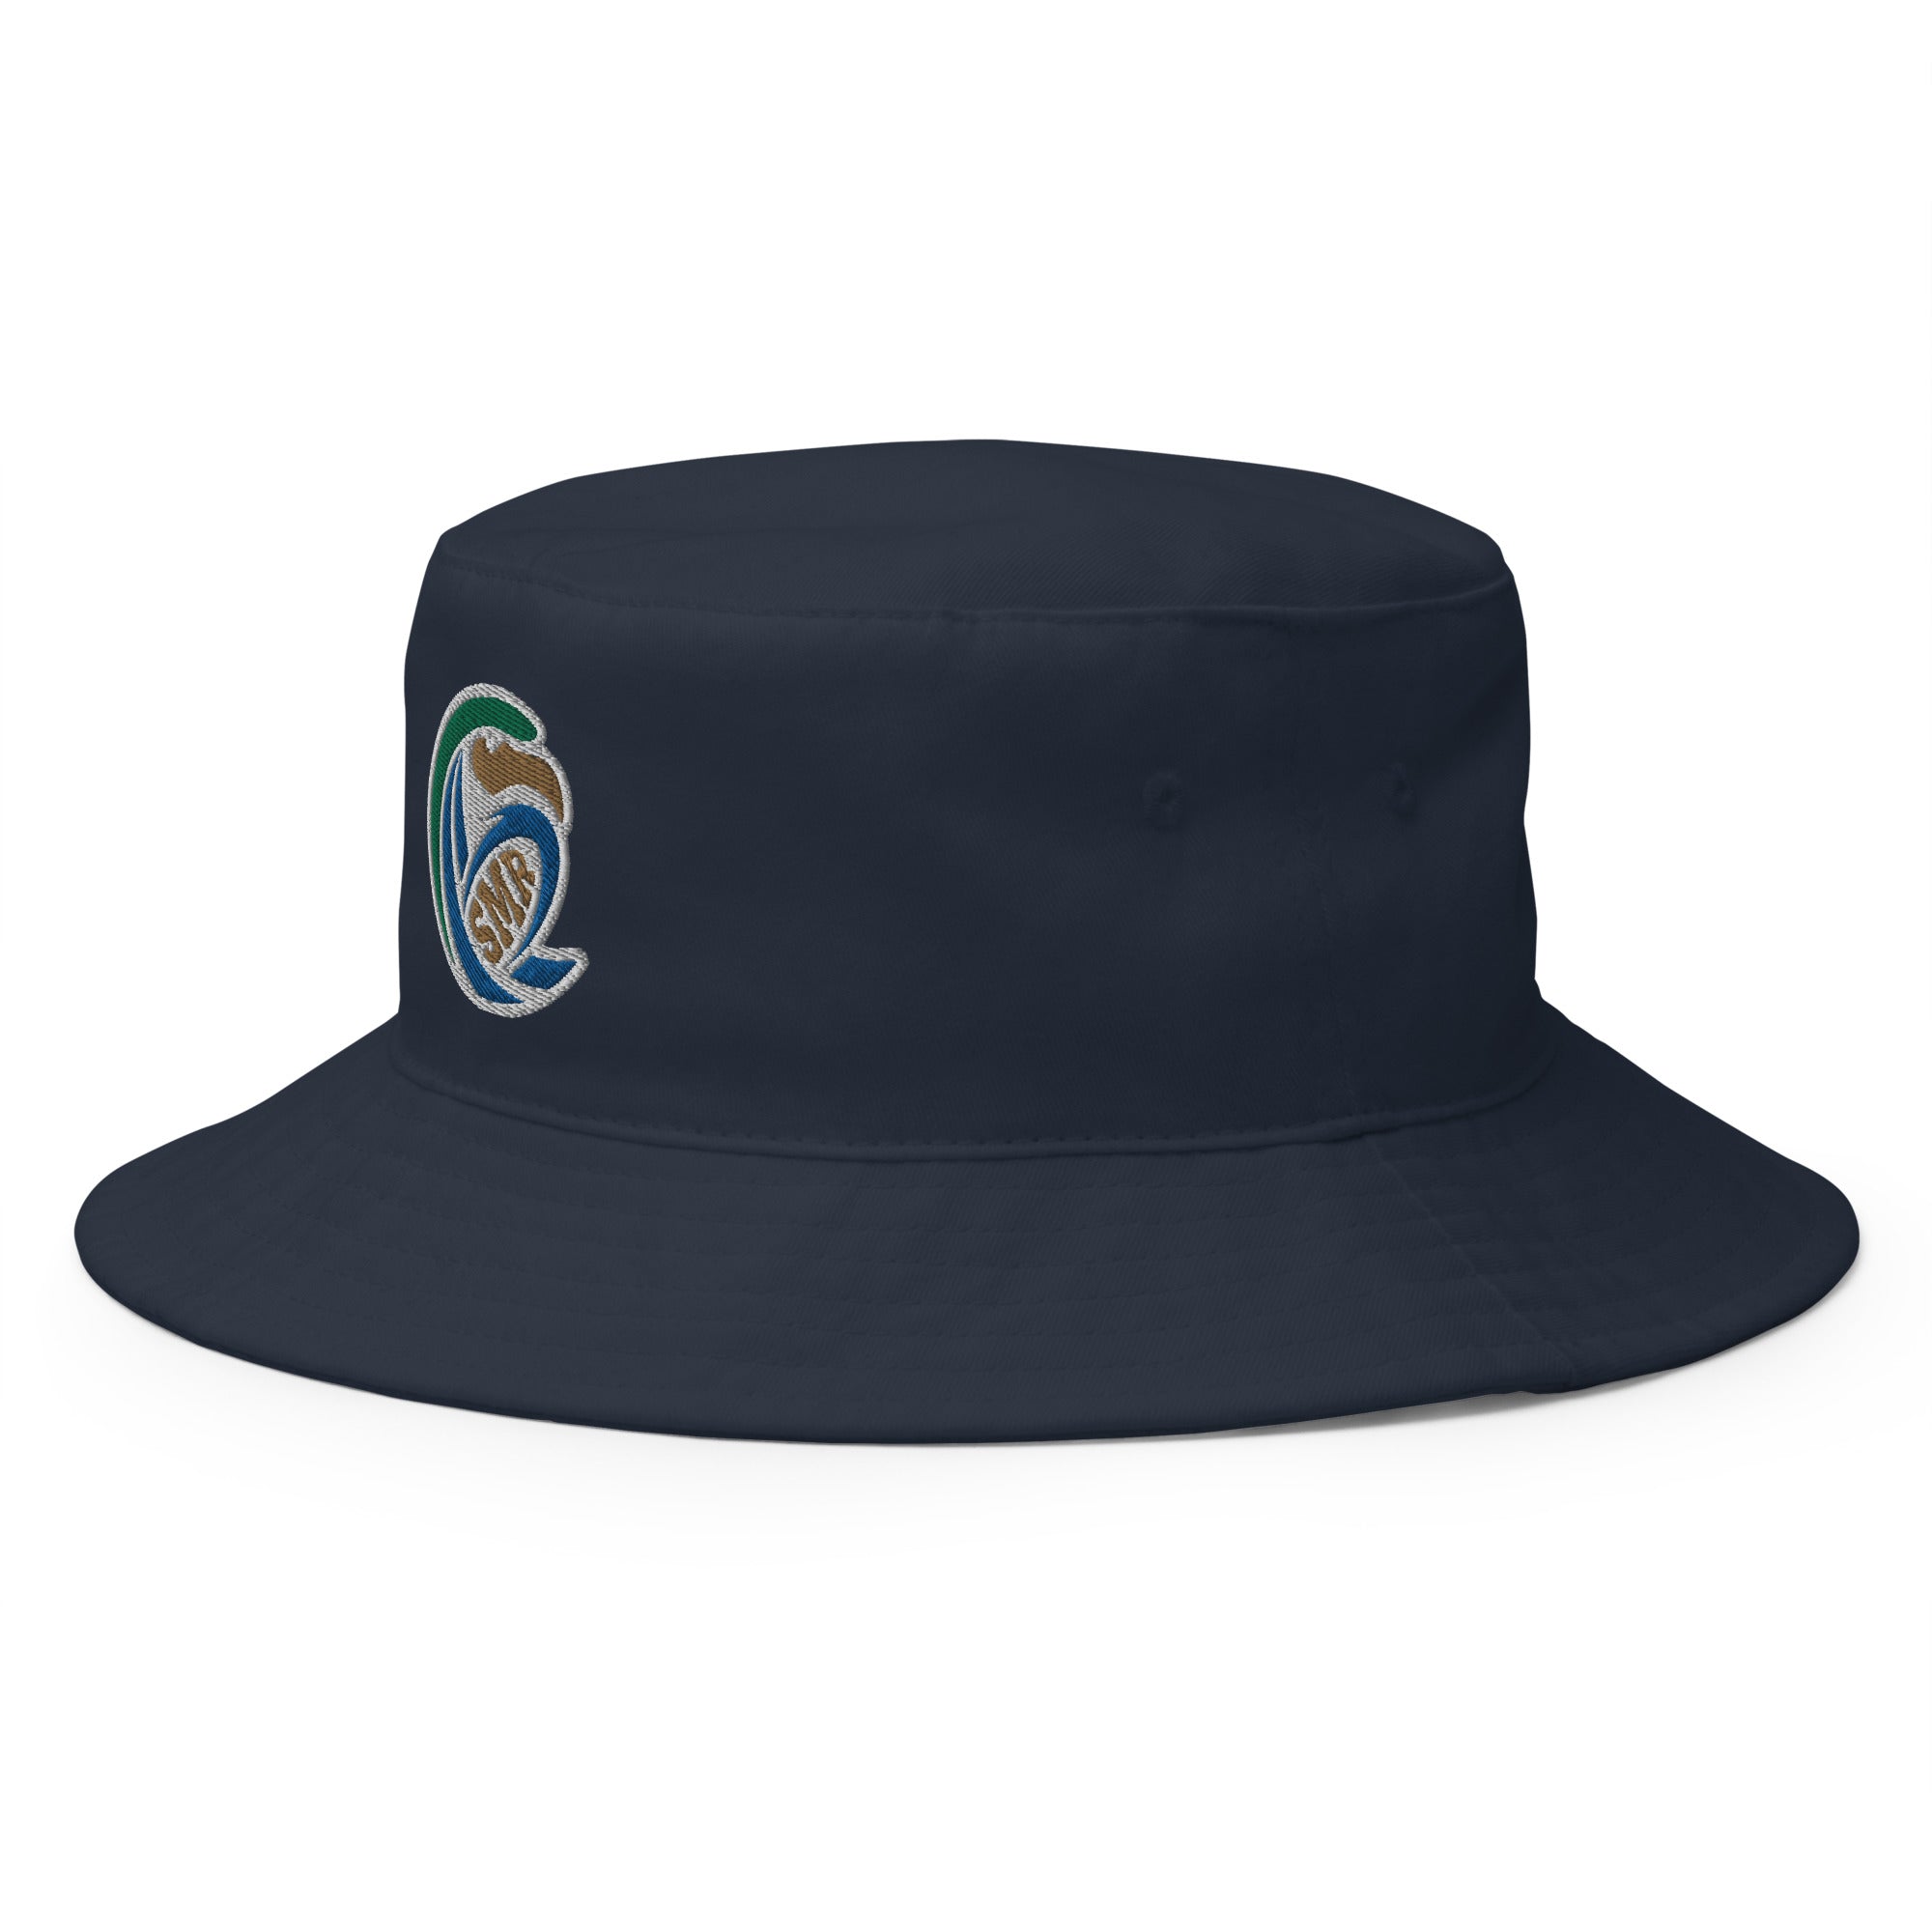 Rugby Imports Salve Men's Rugby Bucket Hat